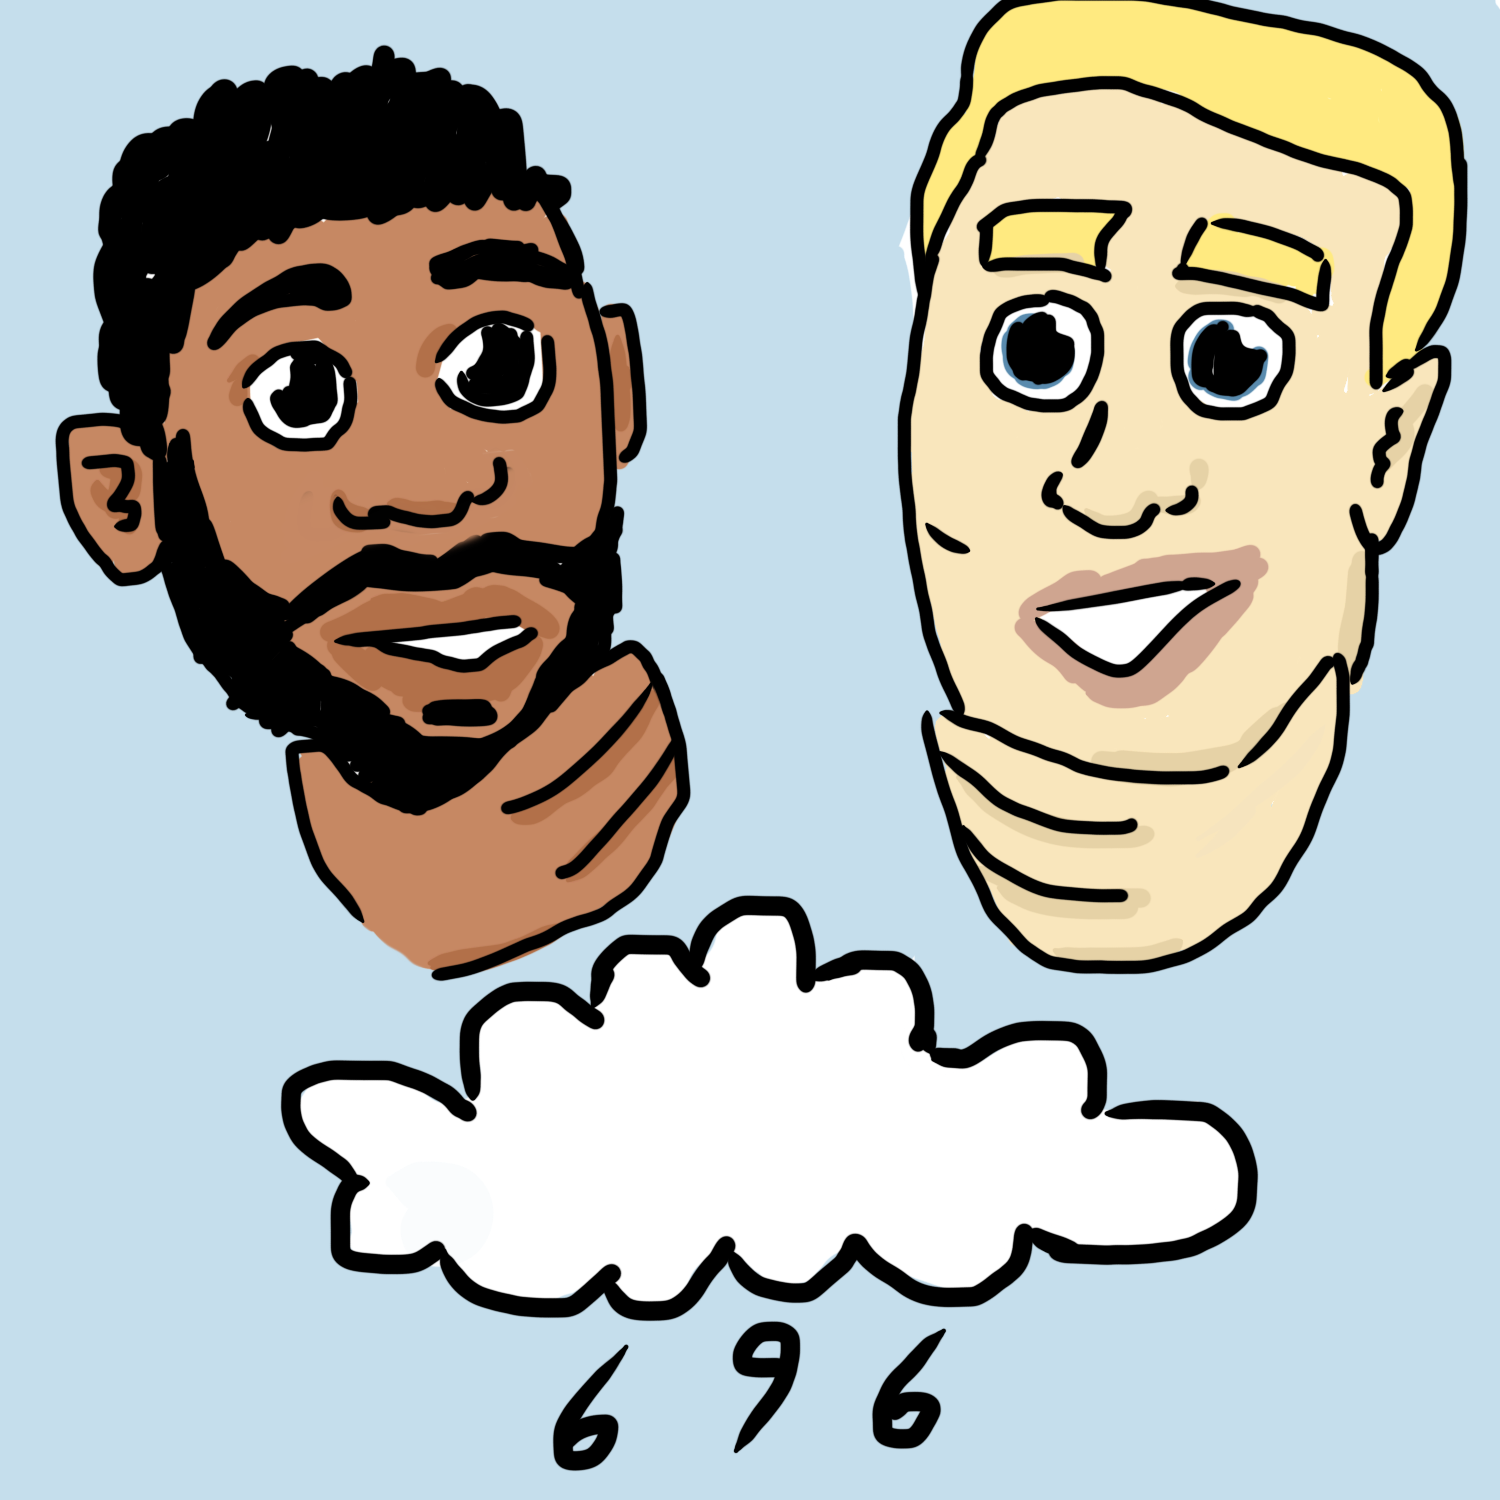 cartoon of us pair, smiling above a cloud with rain shaped like sixes and nines.